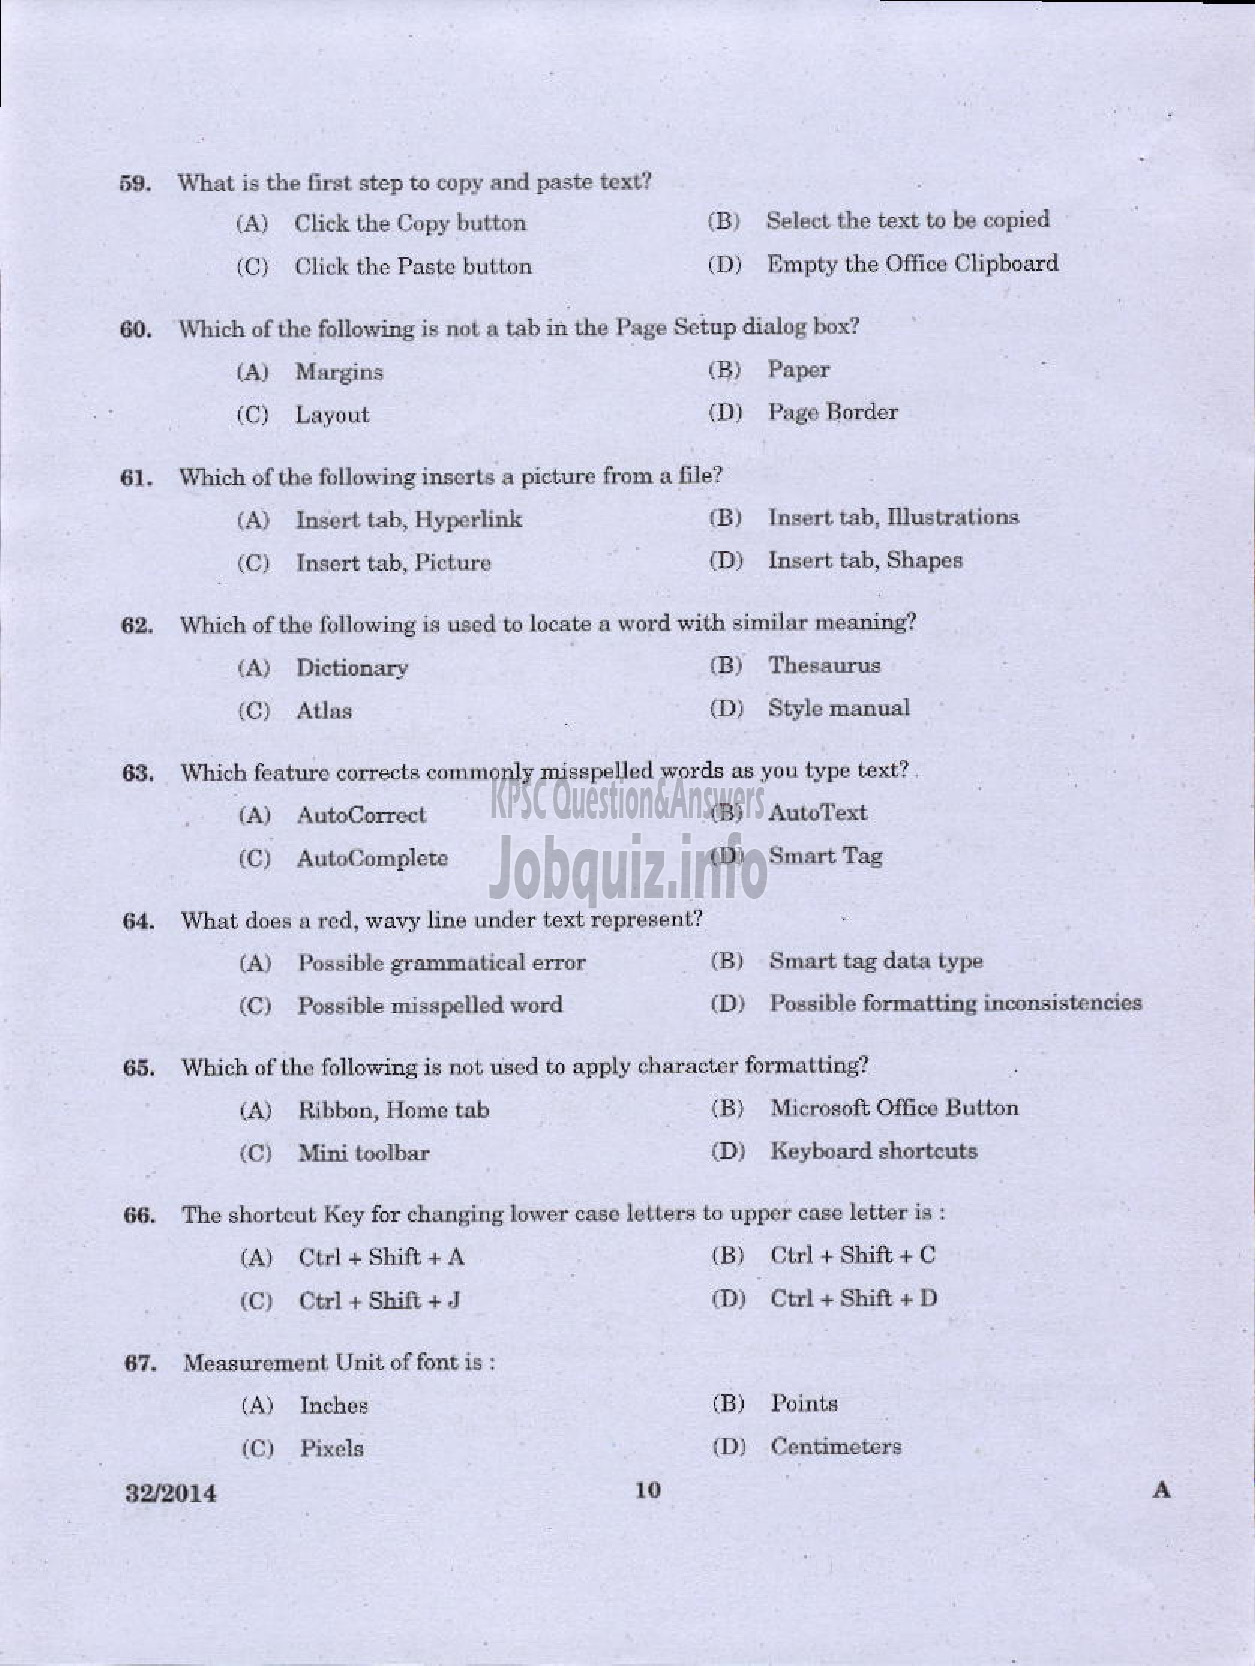 Kerala PSC Question Paper - LOWER DIVISION TYPIST NCA VARIOUS GOVERNMENT OWNED COMPANIES IDKY-8